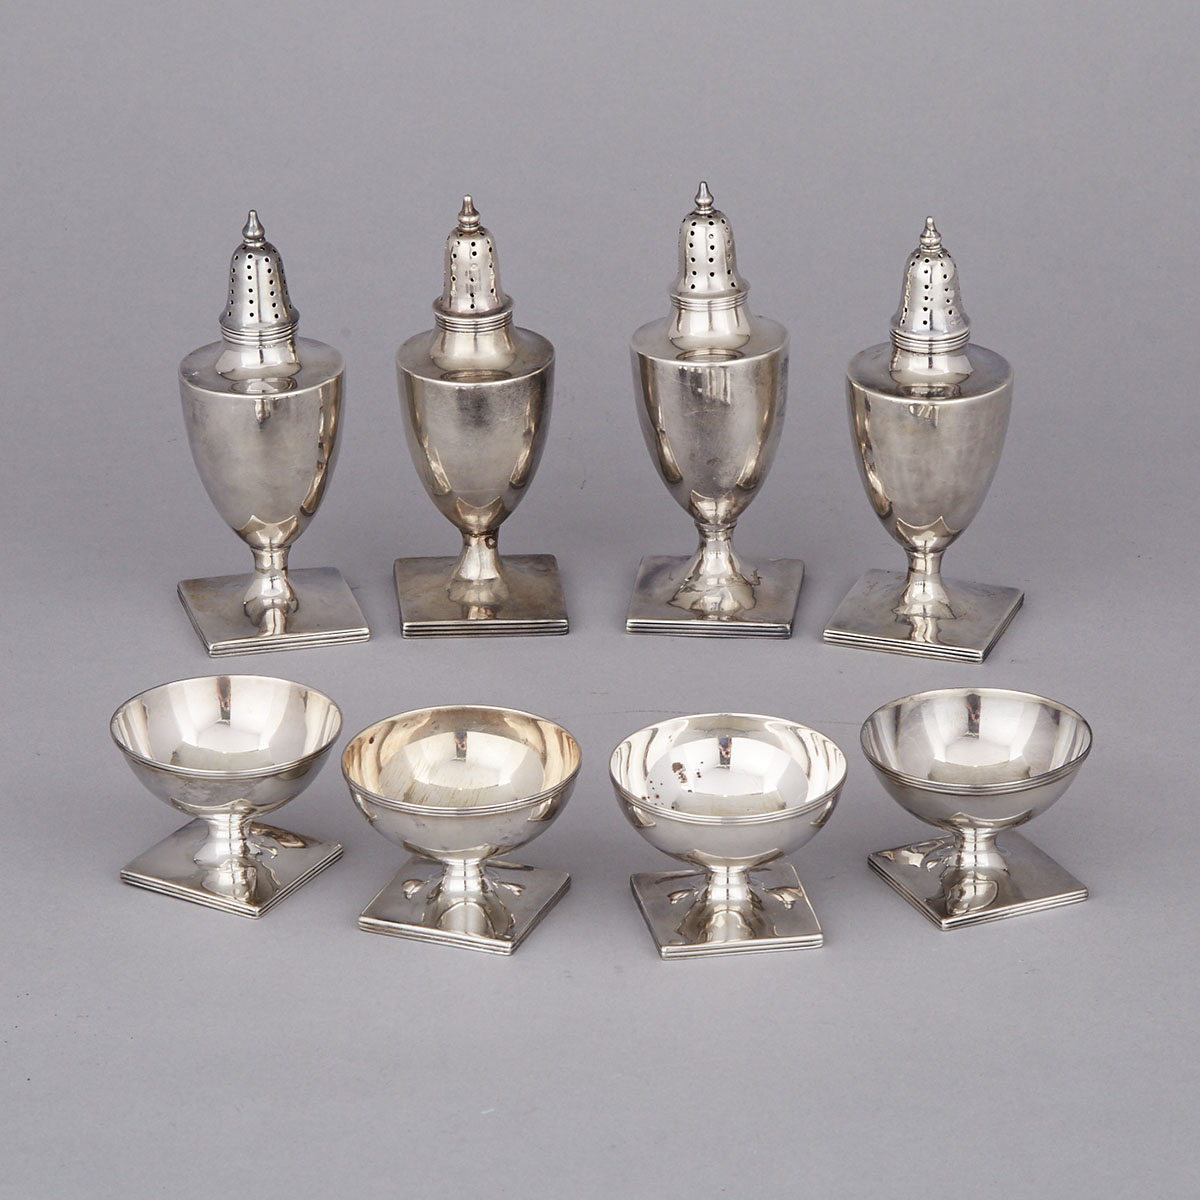 Four George III Style Silver Pepper Casters and Four Salt Cellars, 19th century